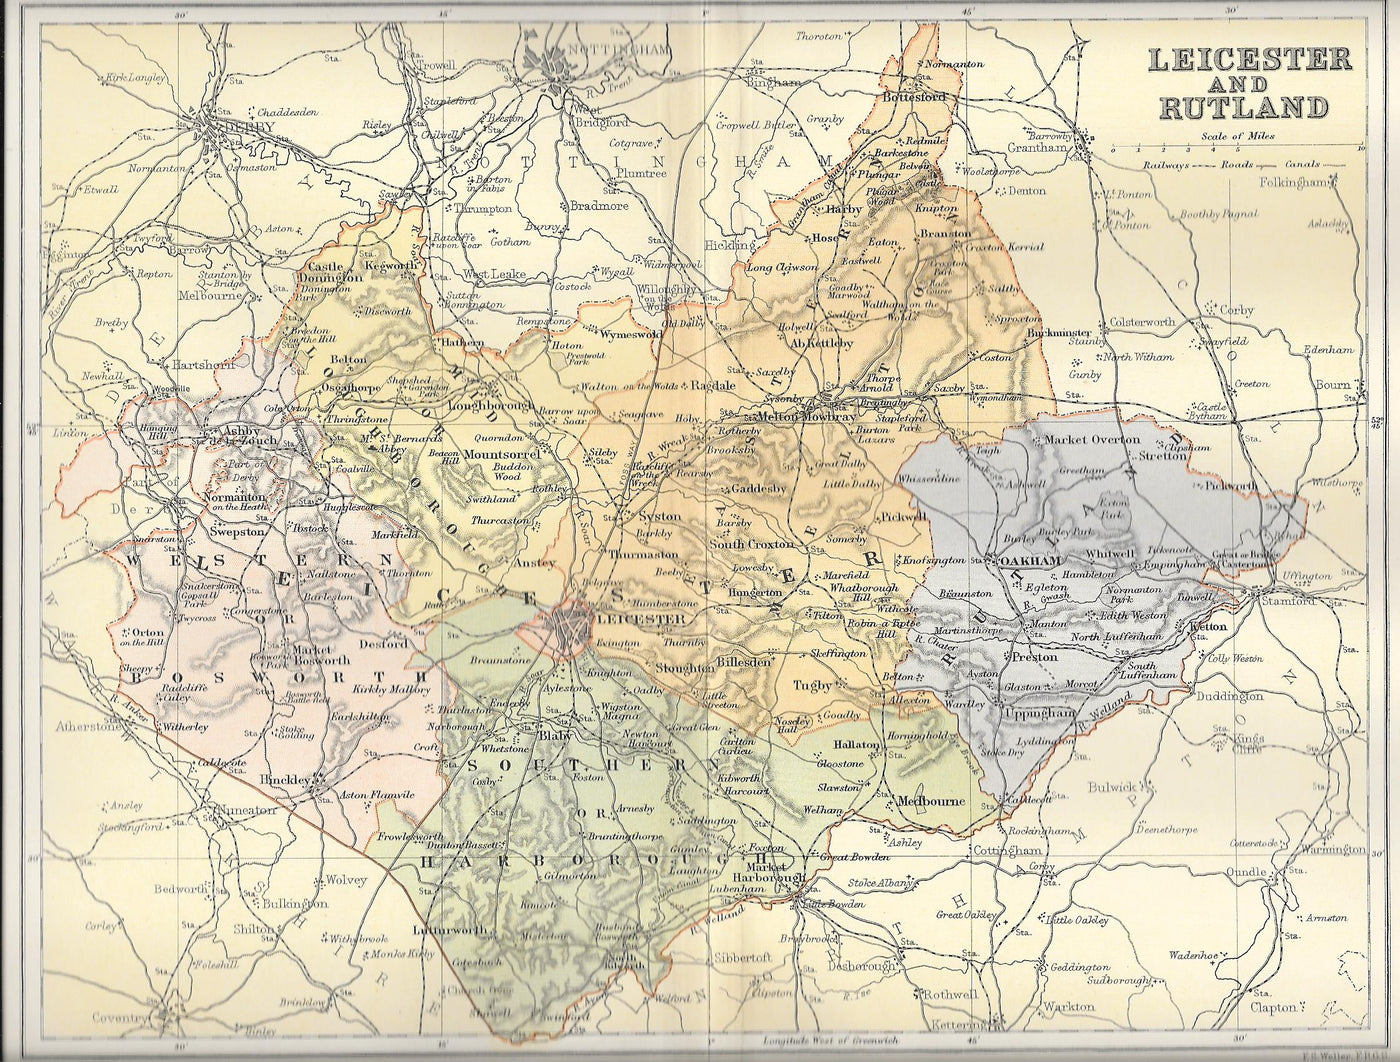 Leicestershire Rutland antique map published 1895